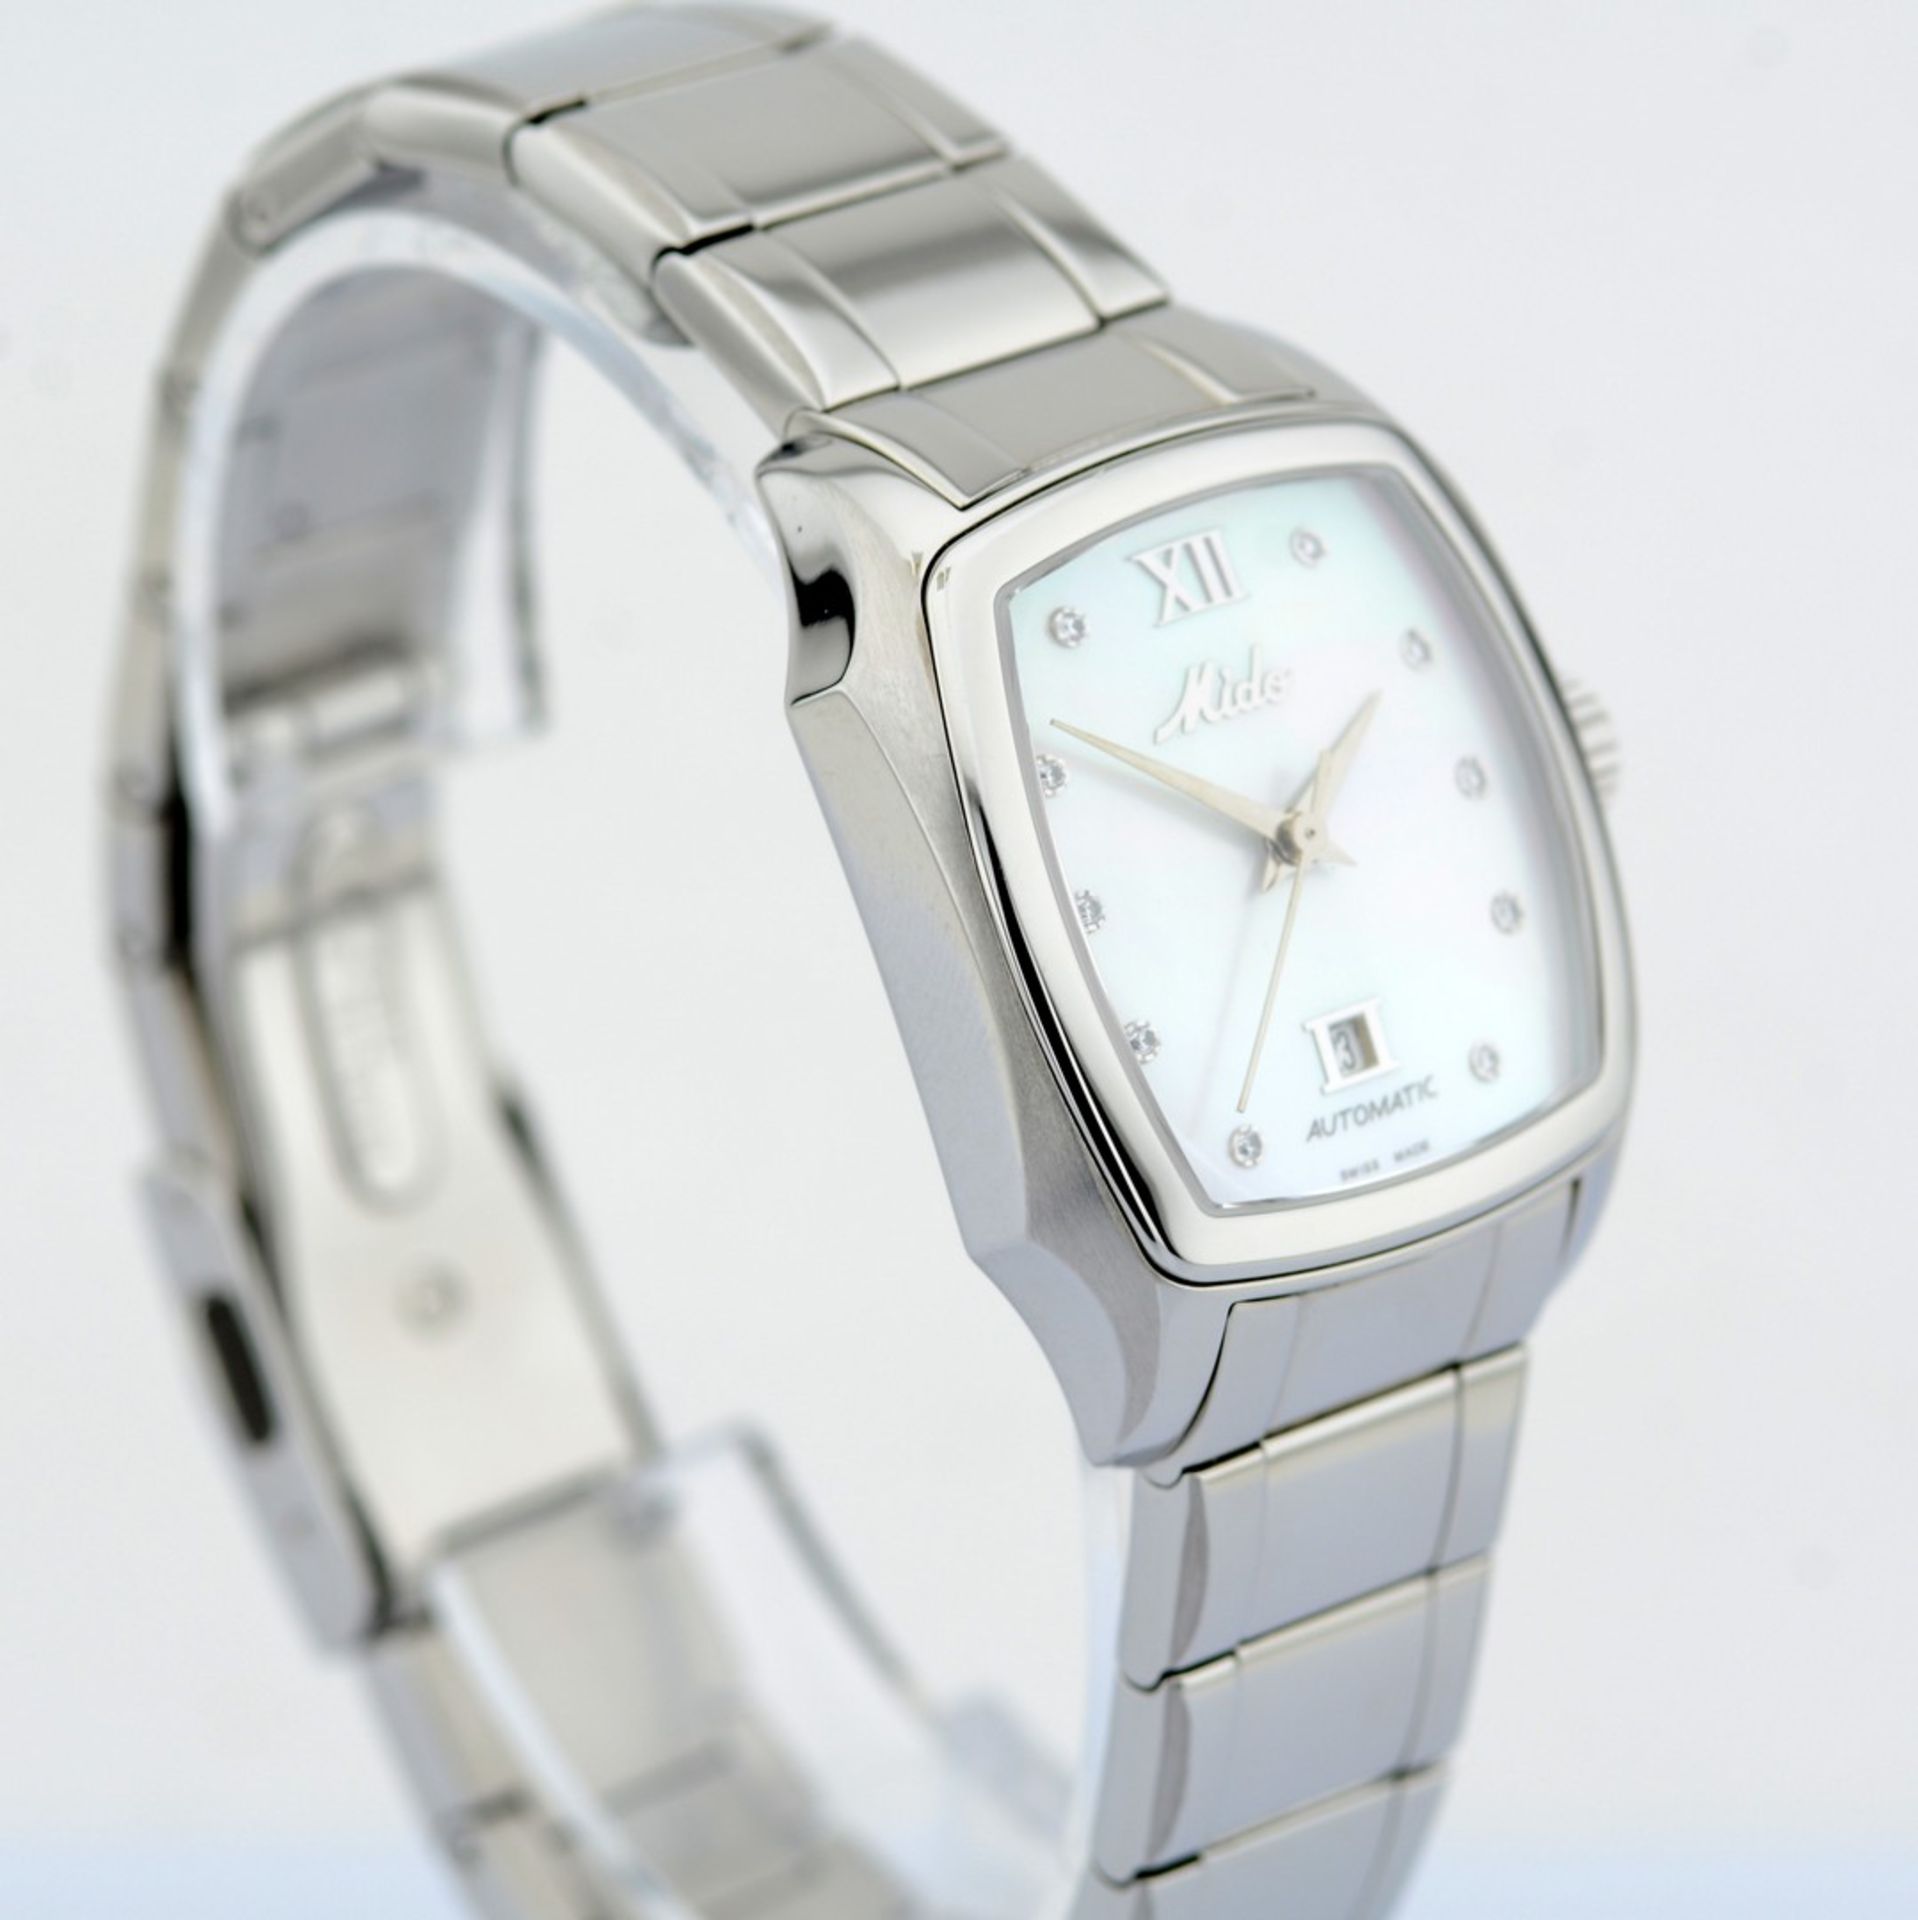 Mido / Ocean Star Diamond - Mother of Pearl Automatic Date - Lady's Steel Wrist Watch - Image 4 of 7